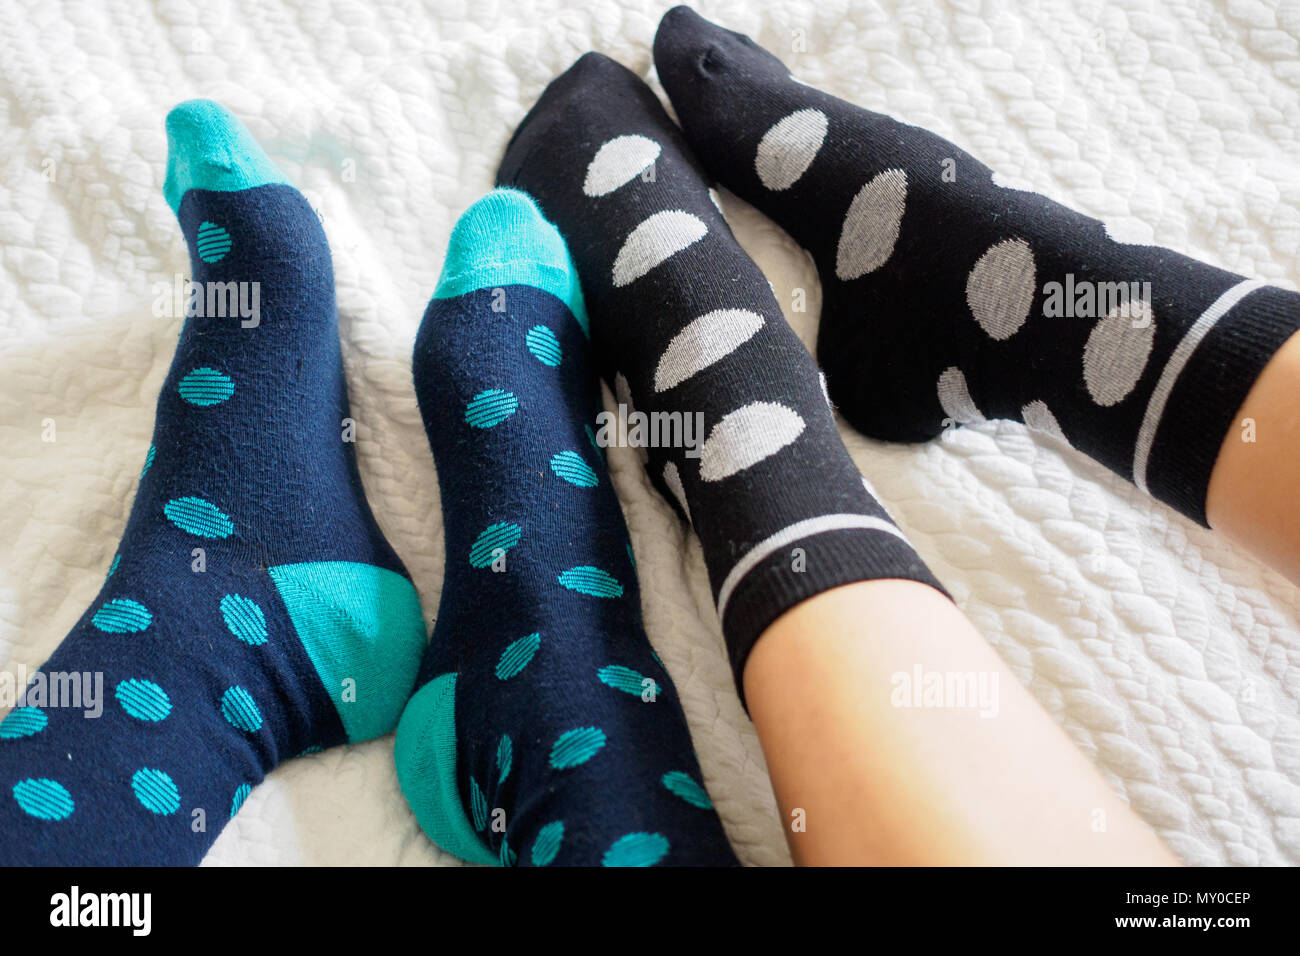 London, UK - November 2017. Young couple posing for a selfie feet wearing blue and white polka dotted socks. Landscape format. Stock Photo